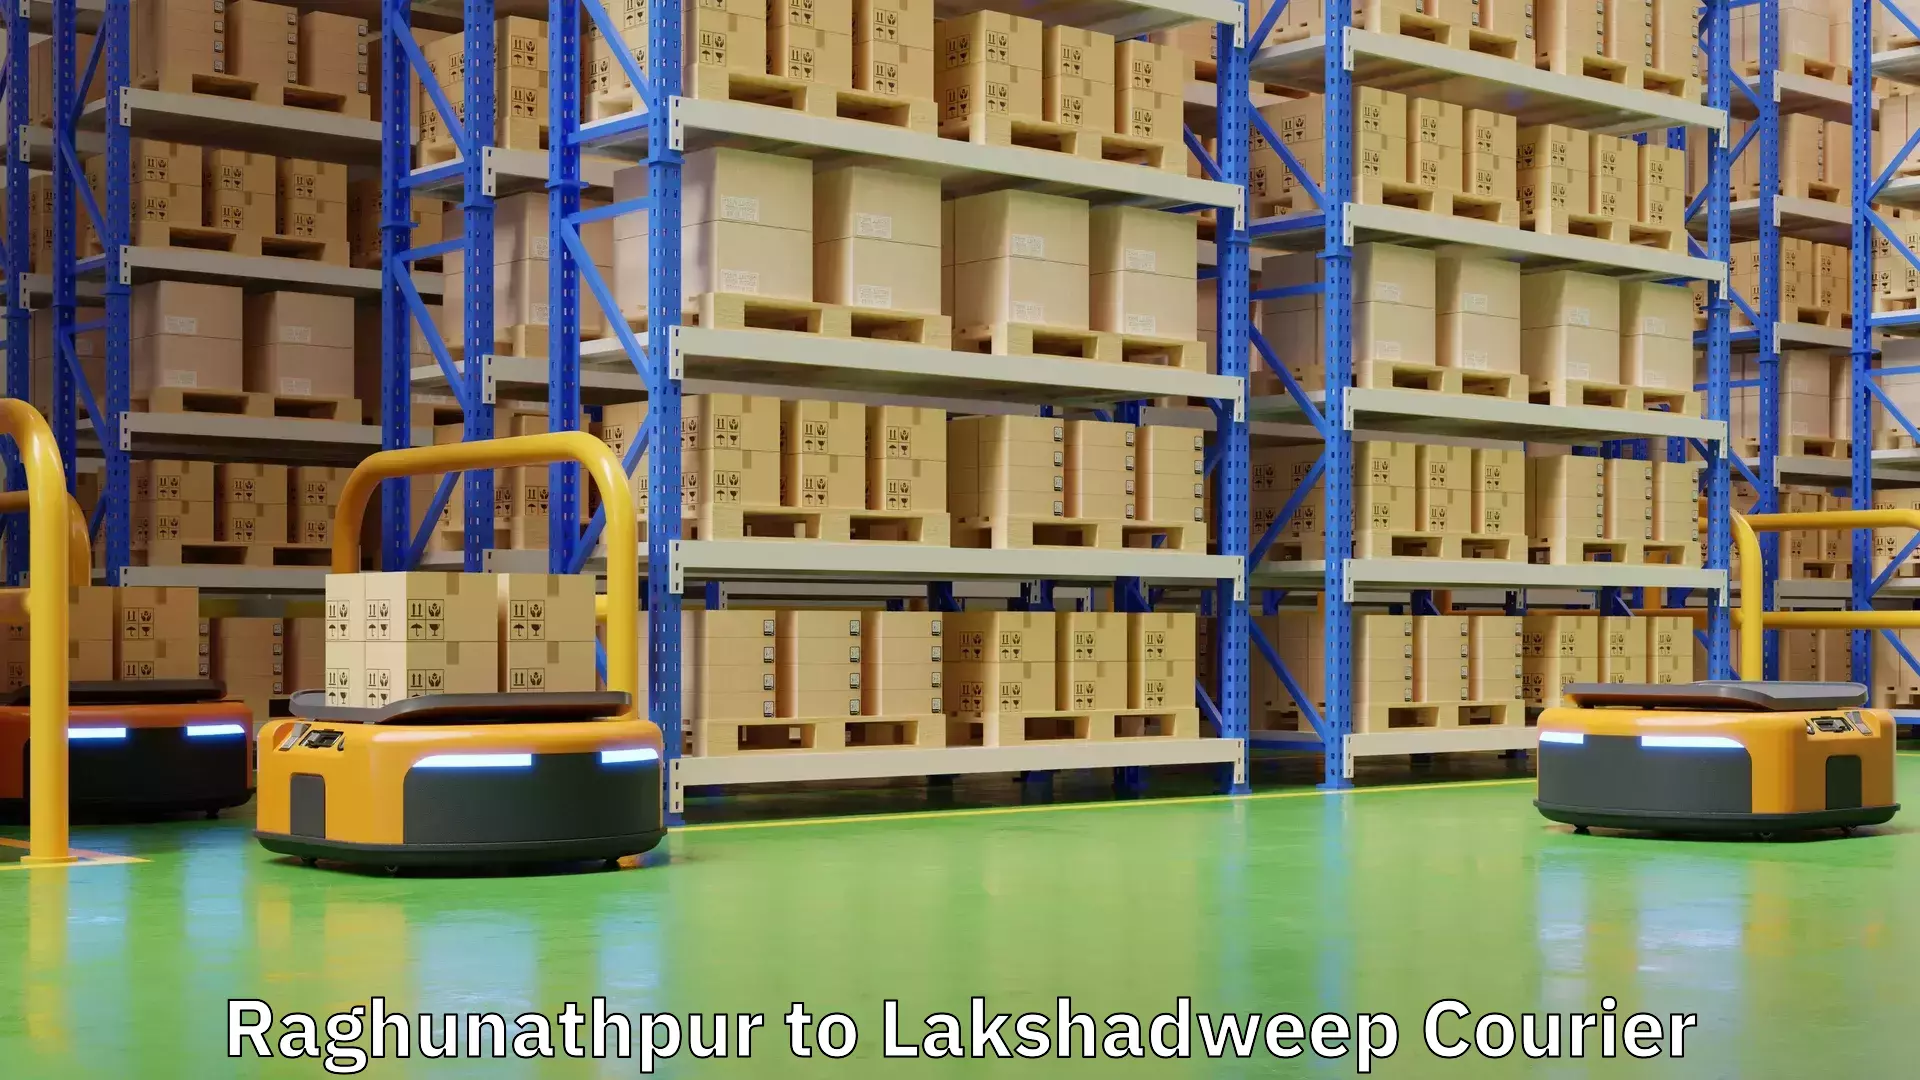 Advanced shipping services in Raghunathpur to Lakshadweep